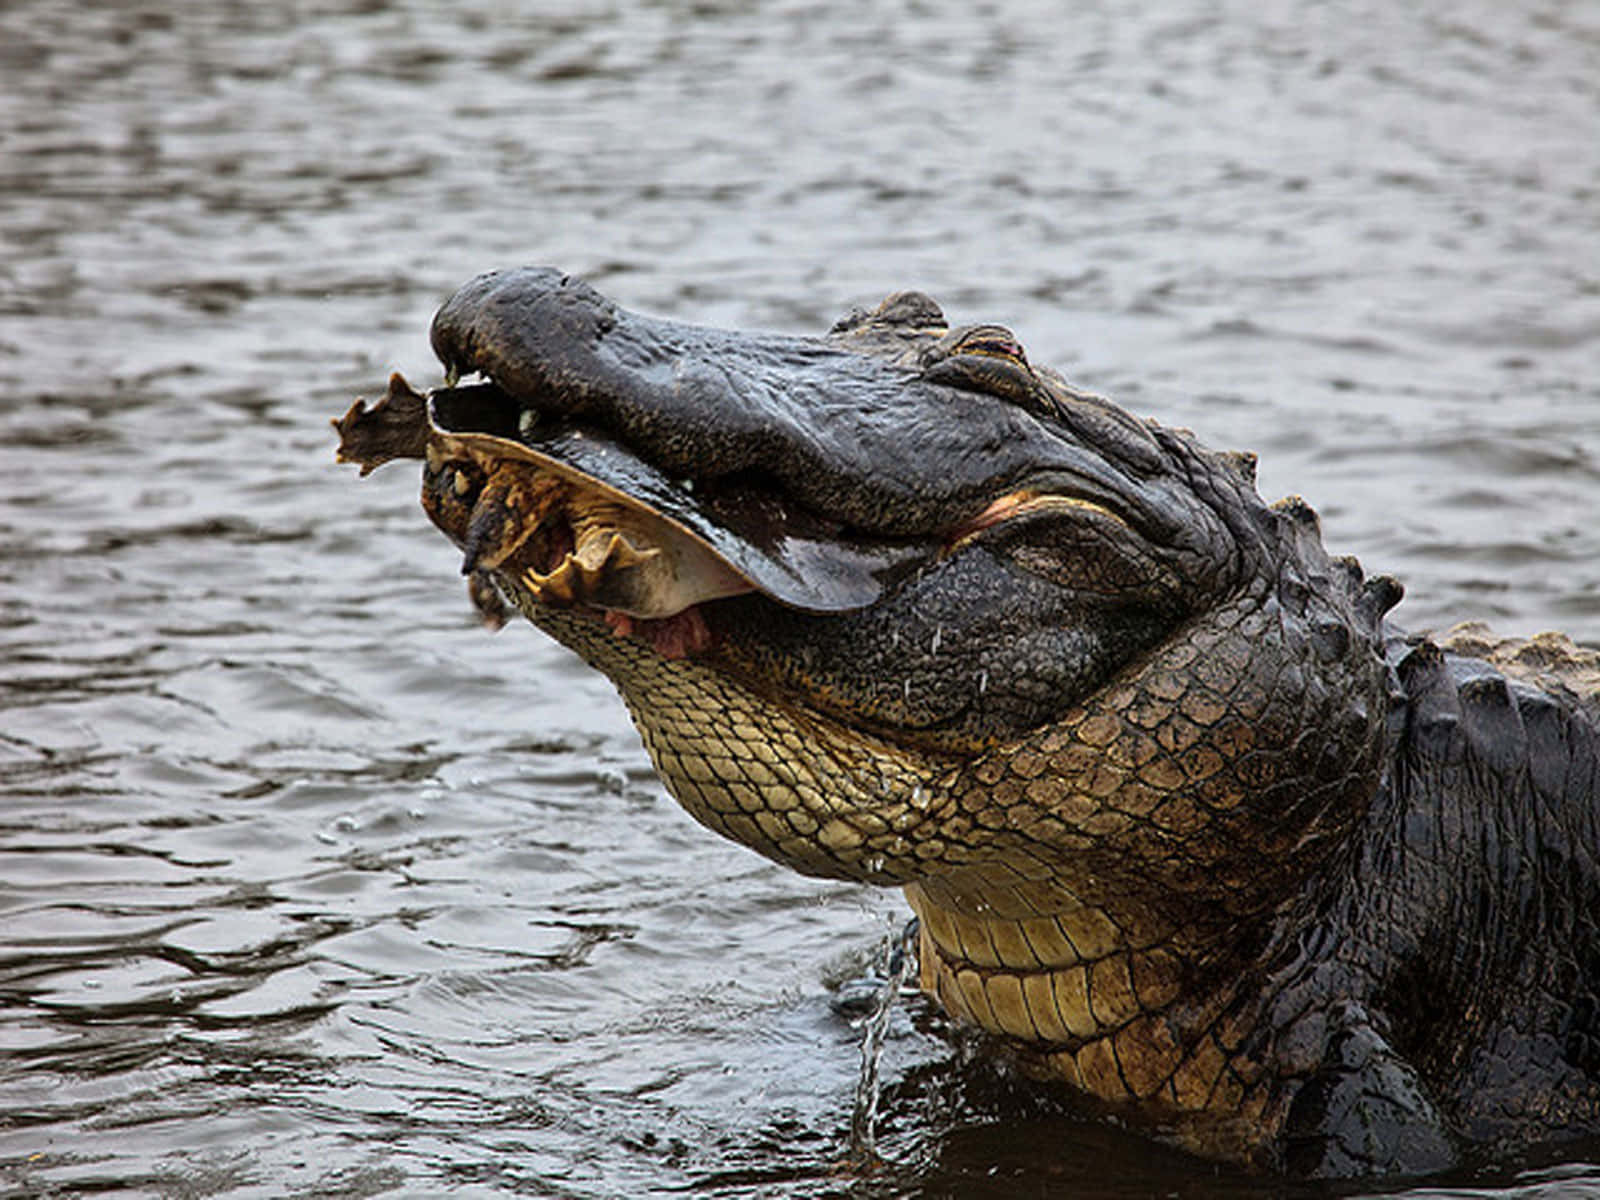 A close up view of a large alligator